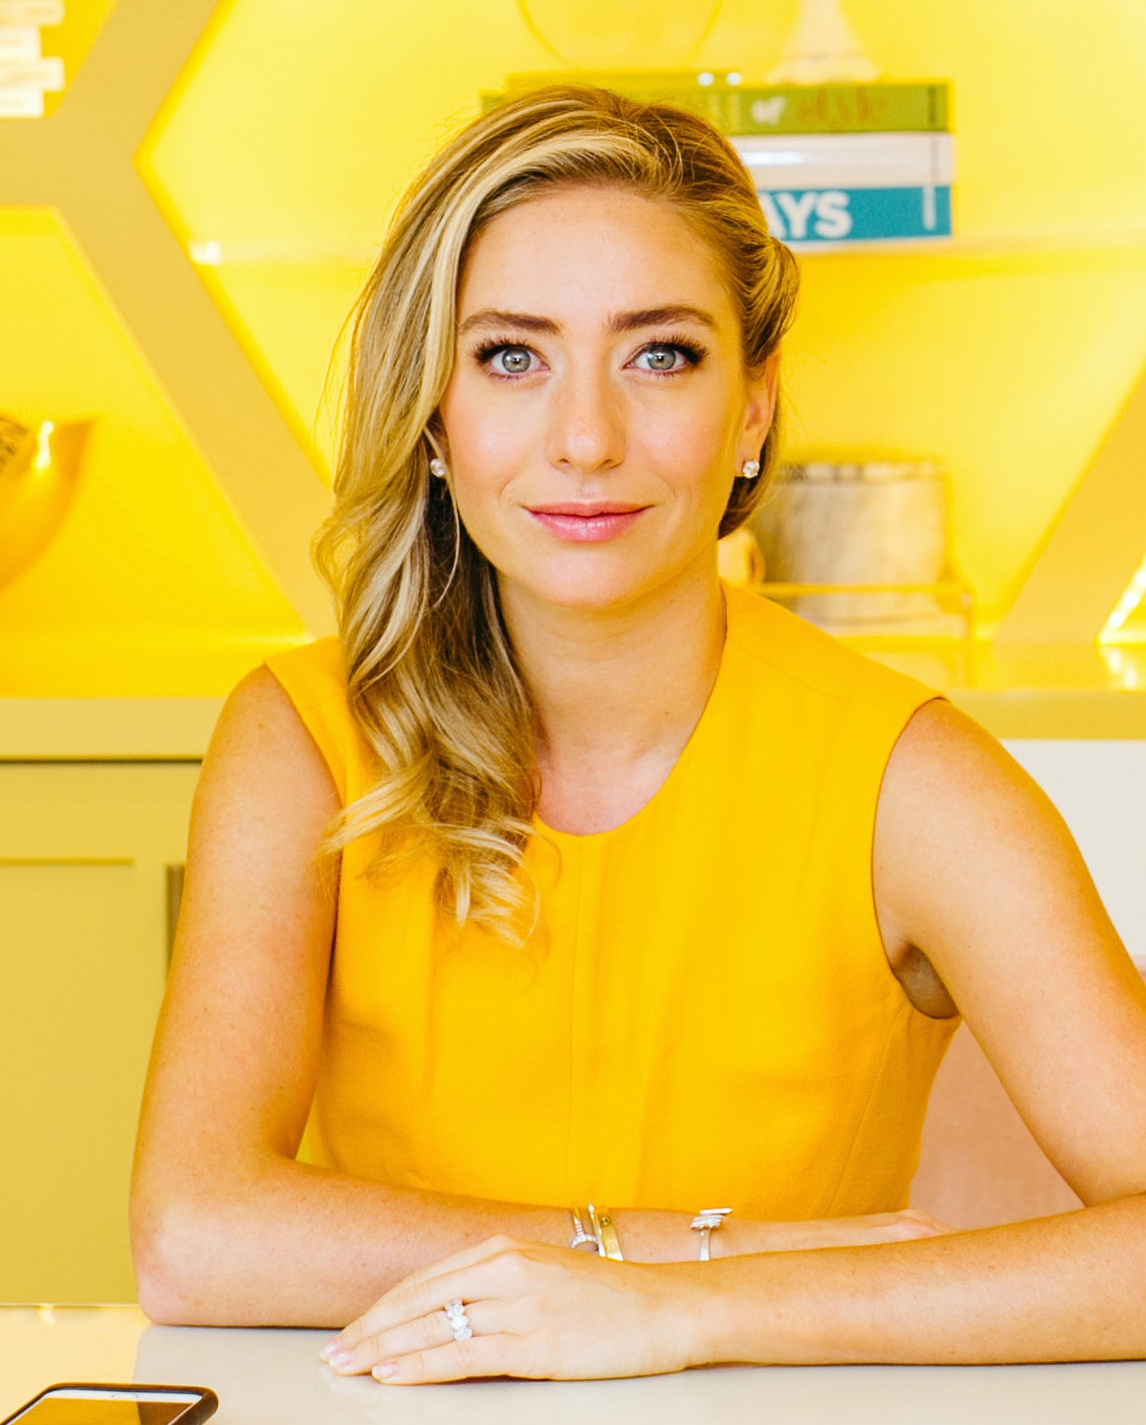 A portraiture photo of Whitney Wolfe Herd. She is in a yellow dress and is leaning both of her arms comfortably against the table in front of her. The background behind her is in the pattern of large honeycombs. 